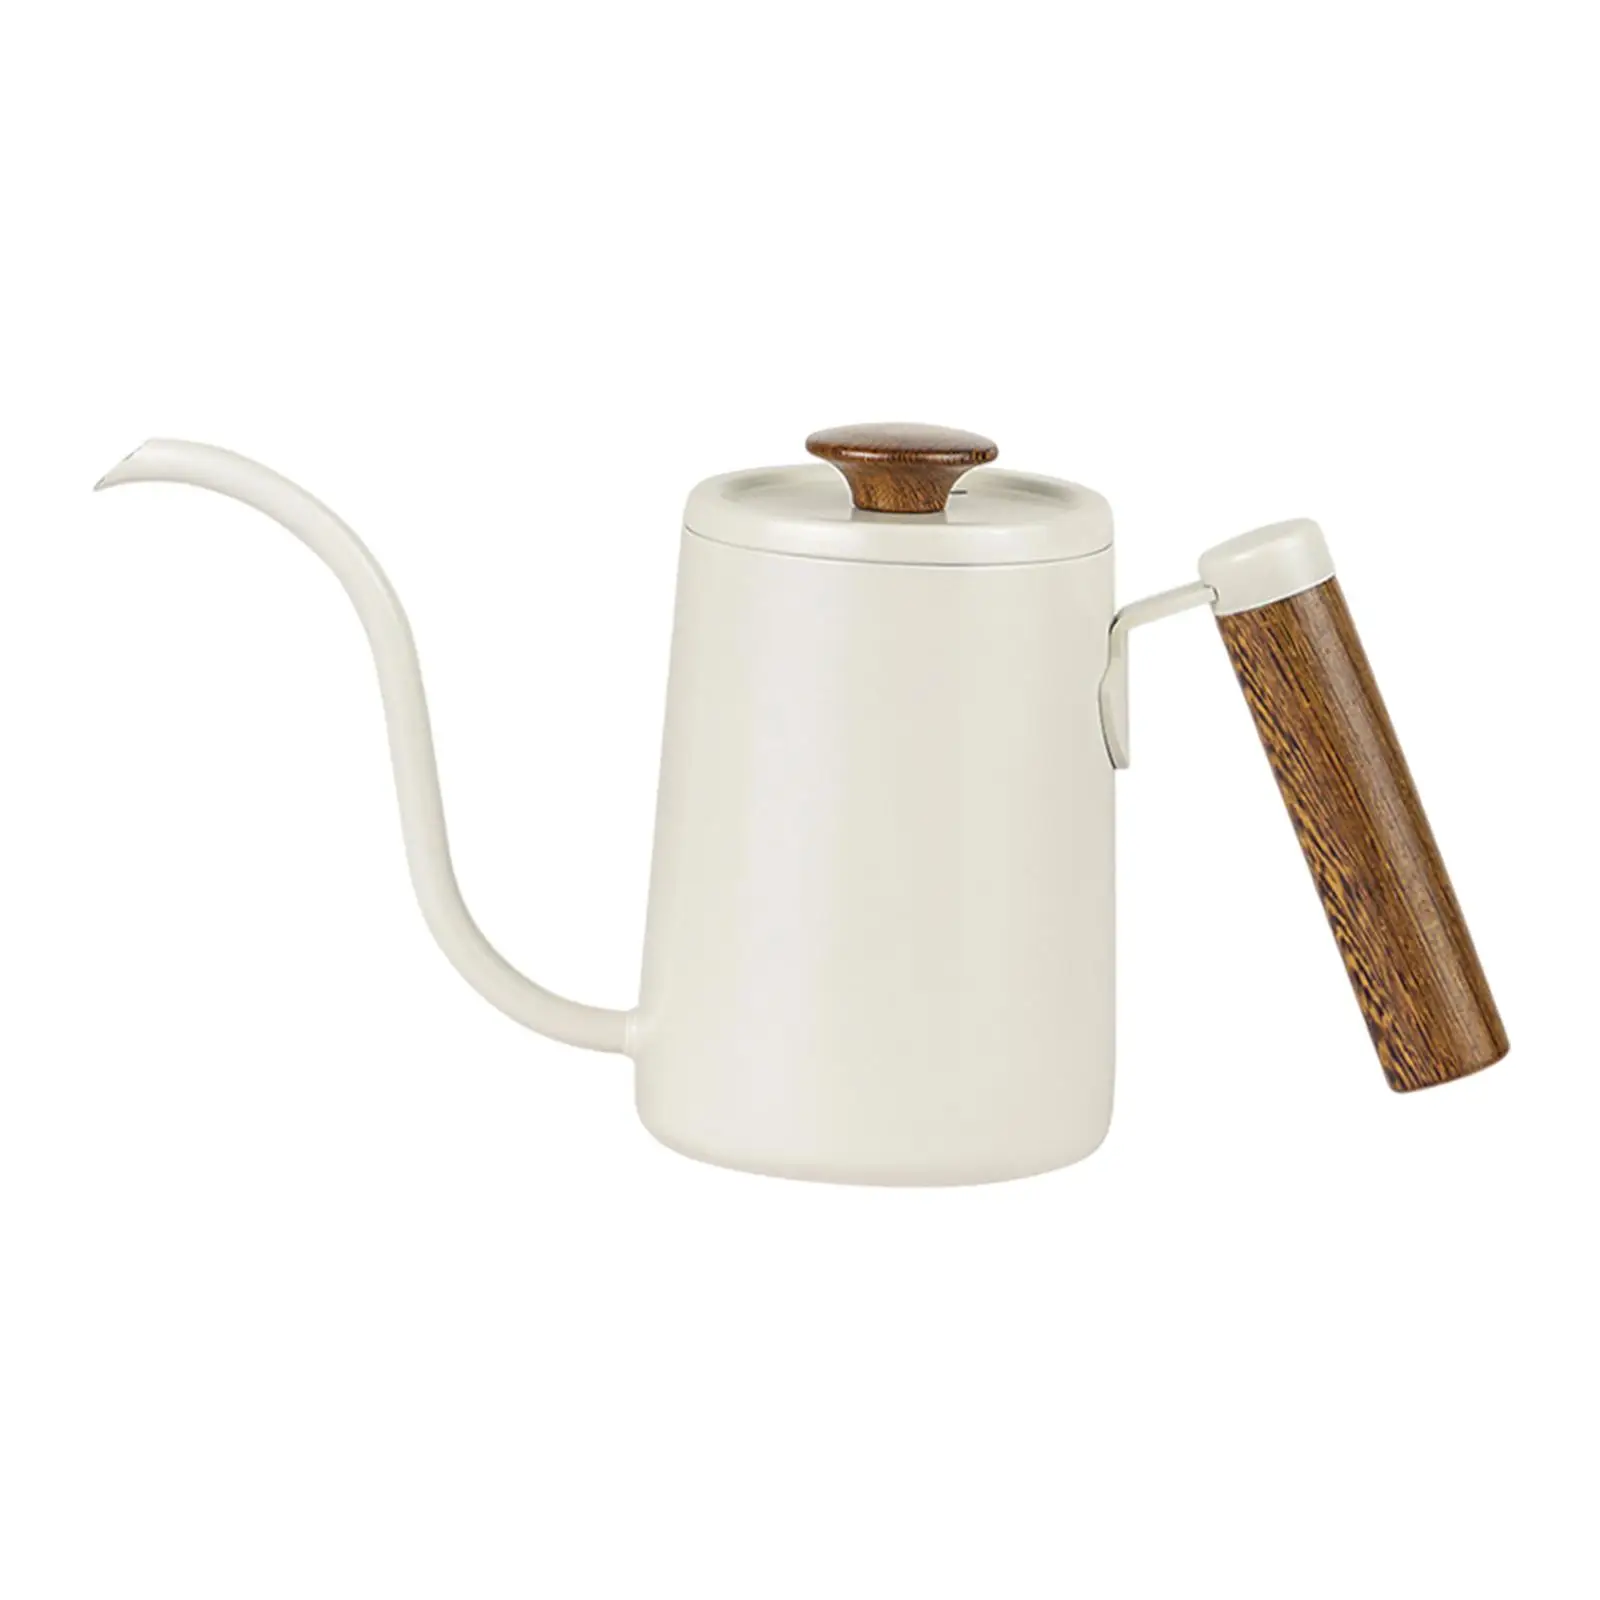 Pour over Coffee Kettle Precision Drip Stainless Steel Tea Kettle Coffee Tea Pot for Maker Kitchen Home